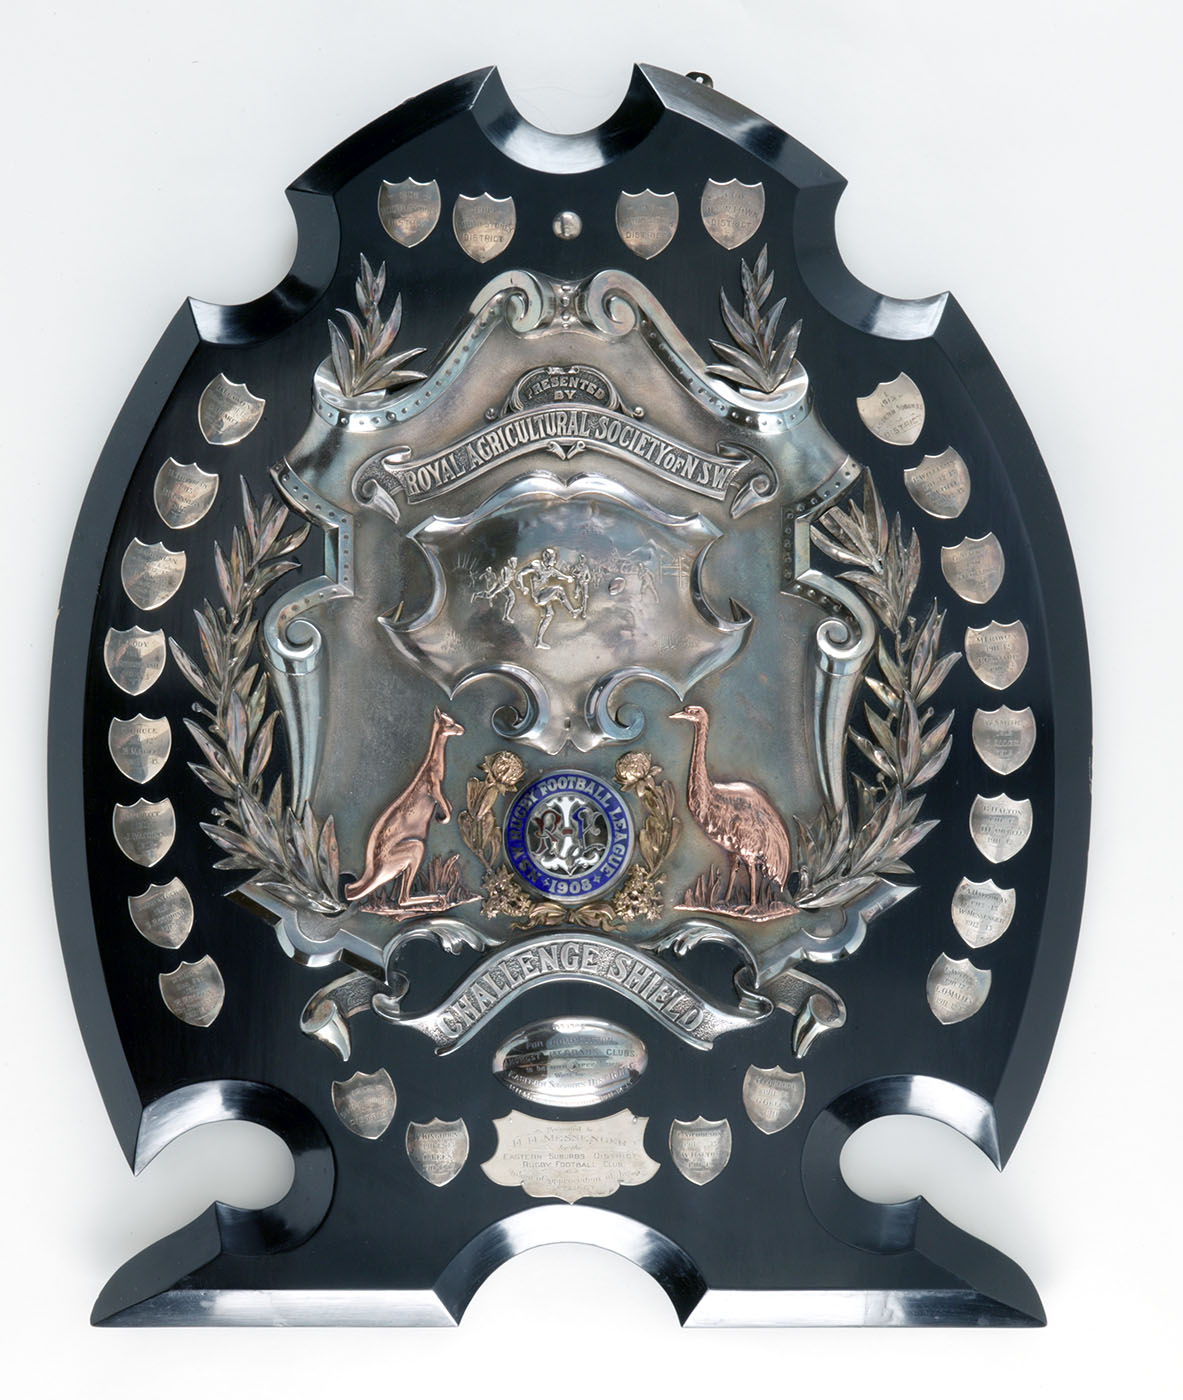 Presentation shield on a timber base. Near the top of the shield, in silver, 'PRESENTED / BY / ROYAL AGRICULTURAL SOCIETY OF N.S.W' is printed on a scroll above a silver relief scene from a rugby match. A gilded kangaroo and emu flank a gilded waratah wreath. - click to view larger image